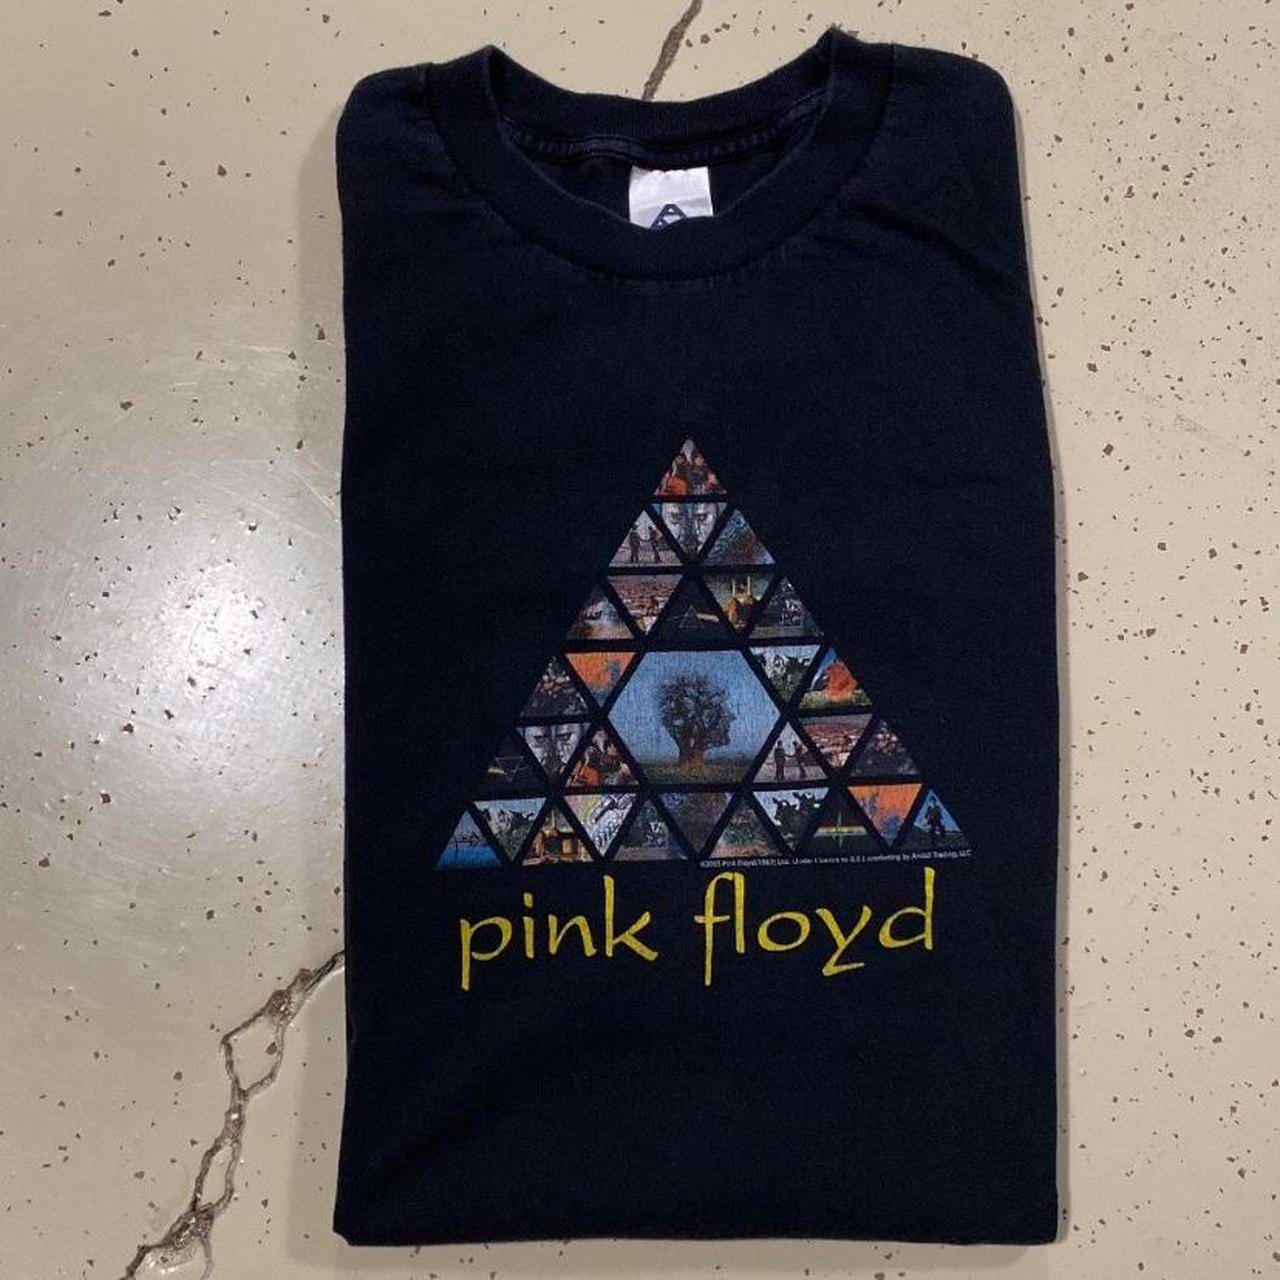 2005 Pink Floyd triangle albums / photographs band...